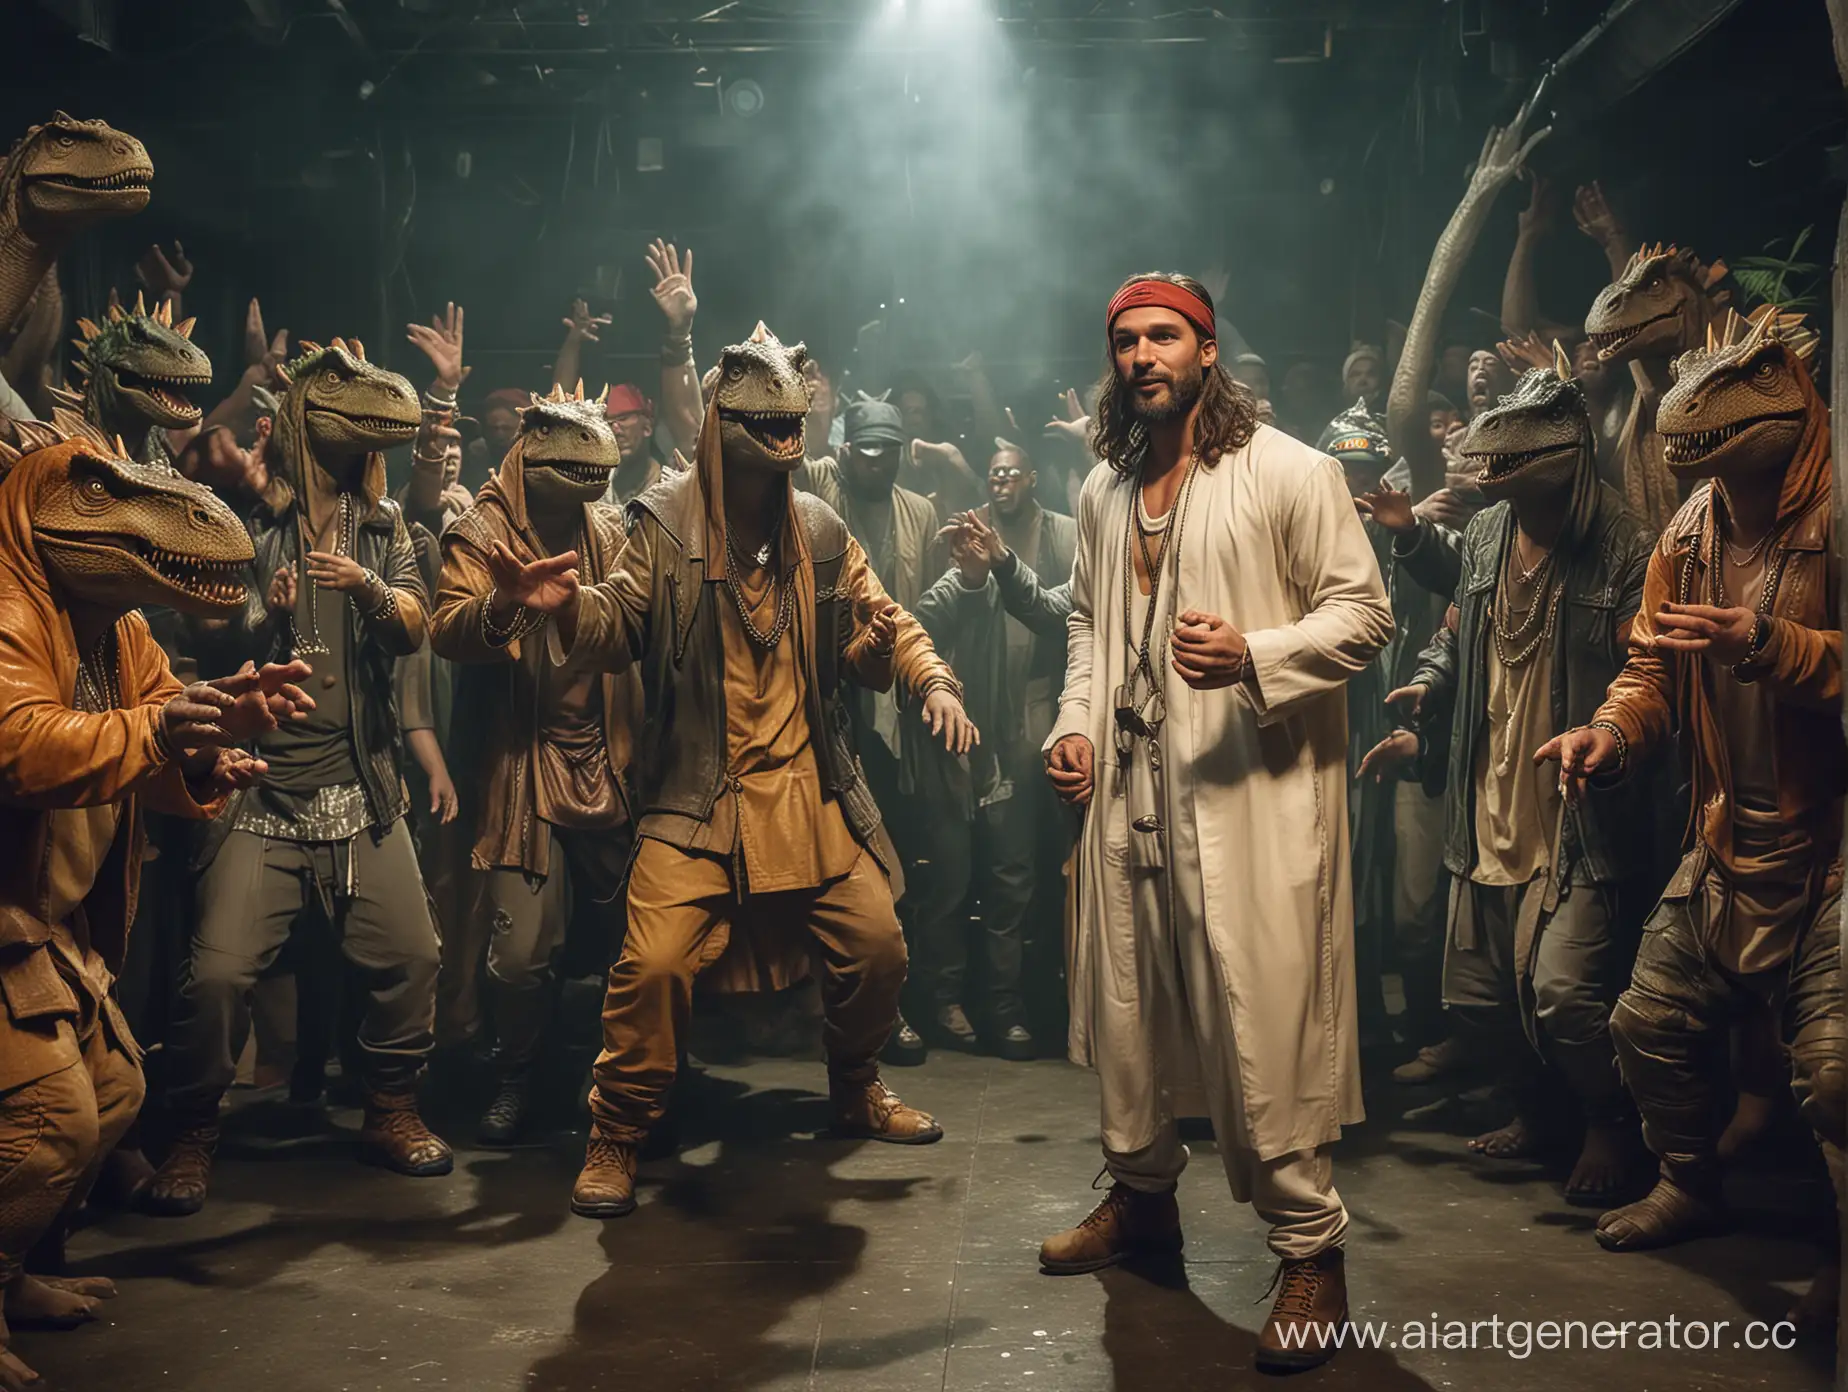 Jesus-Birthday-Bash-with-HipHop-Dinosaurs-and-Olympian-Gods-in-a-Russian-Nightclub